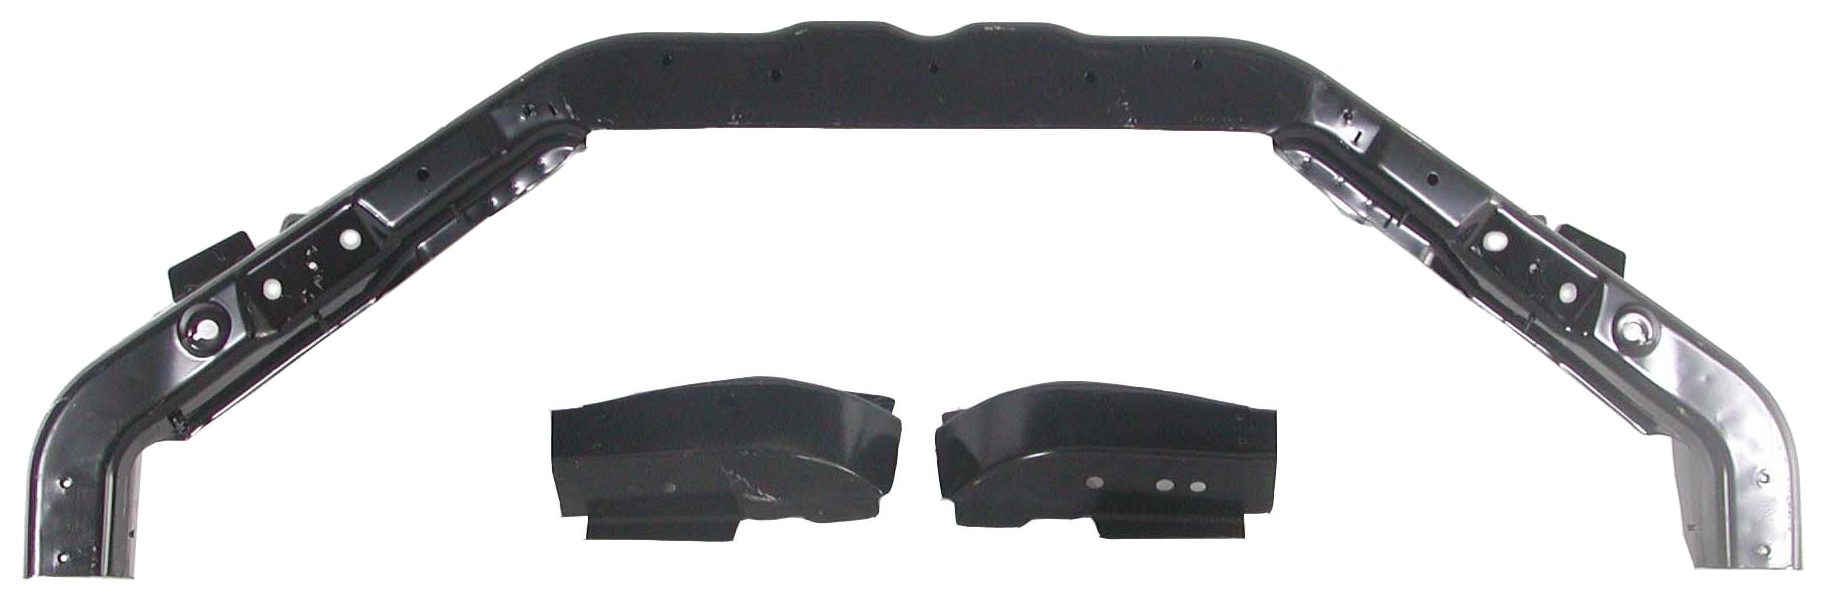 Aftermarket RADIATOR SUPPORTS for PONTIAC - G5, G5,07-09,Radiator support